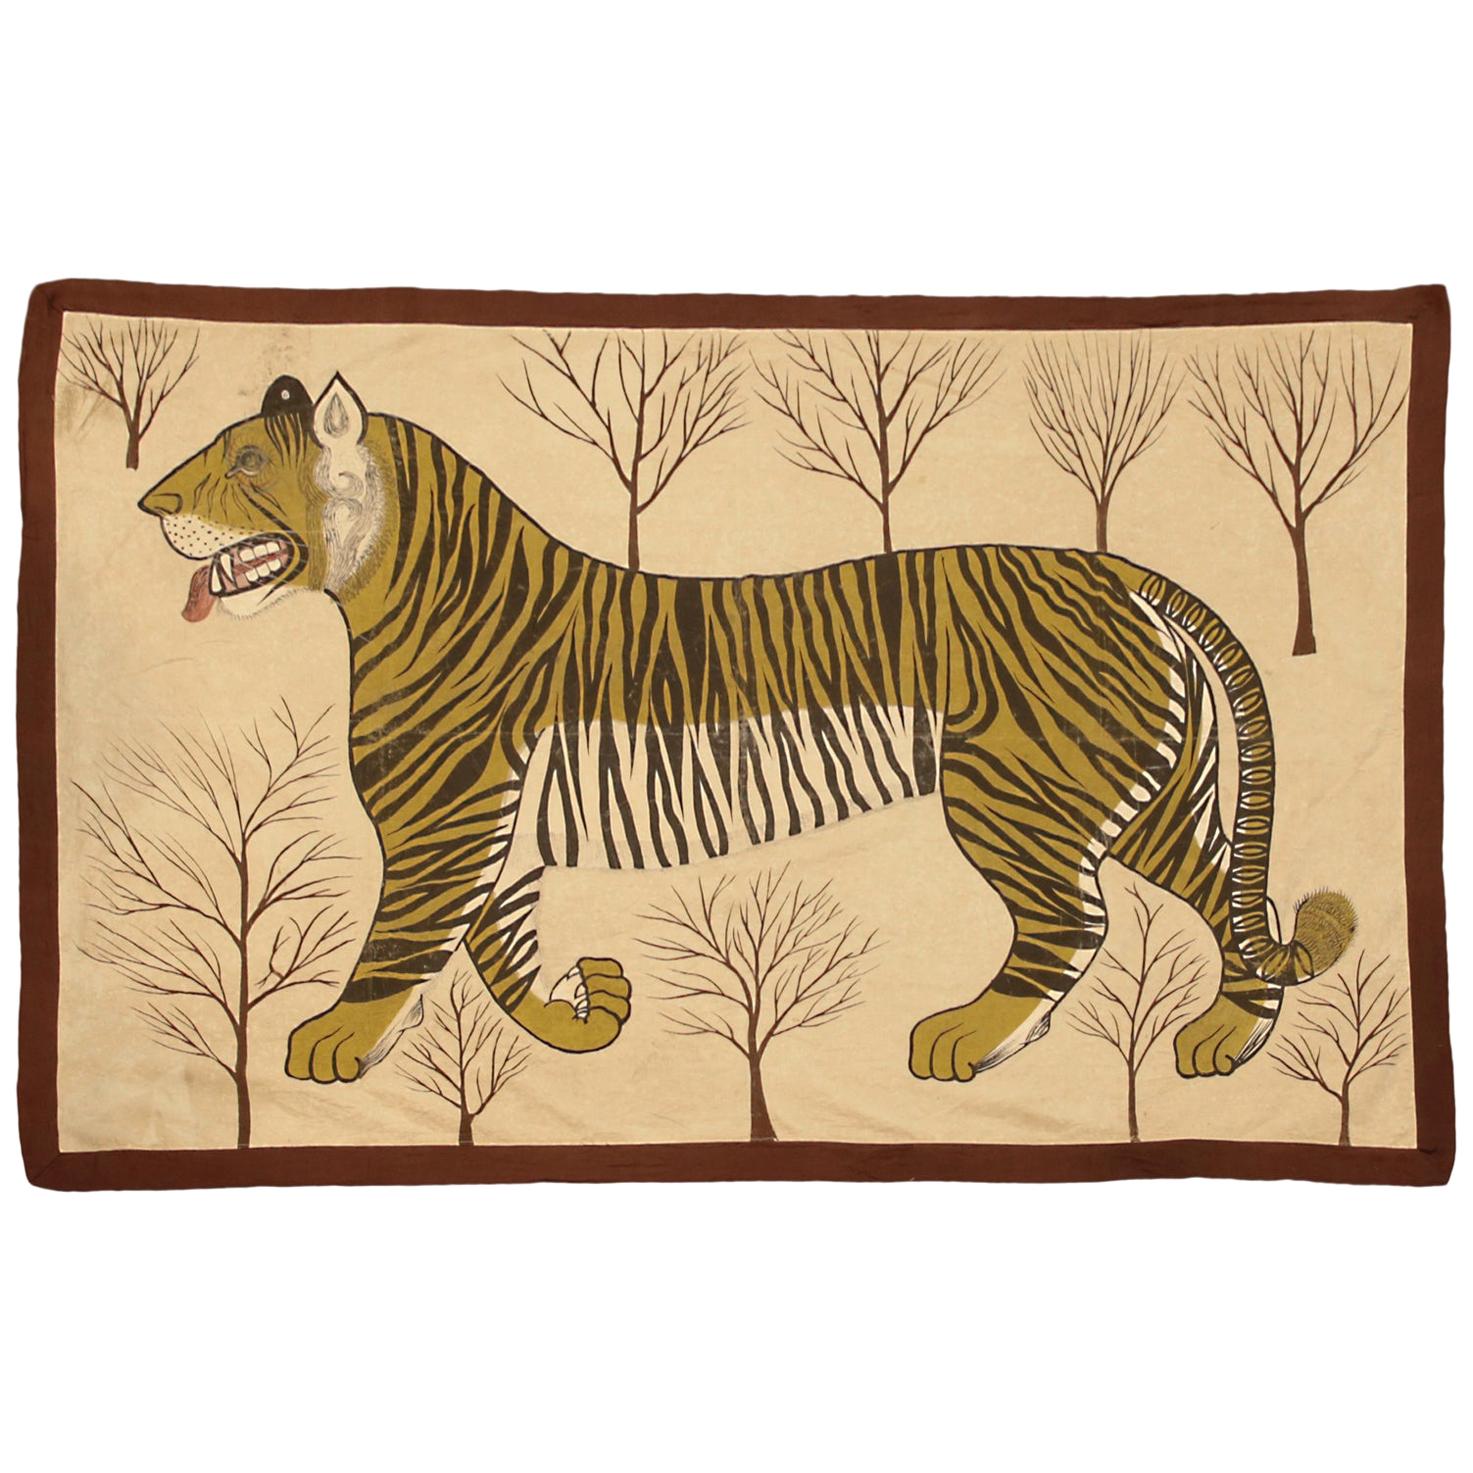 Antique Chinese Ivory Silk Tiger Textile, ca. 1900